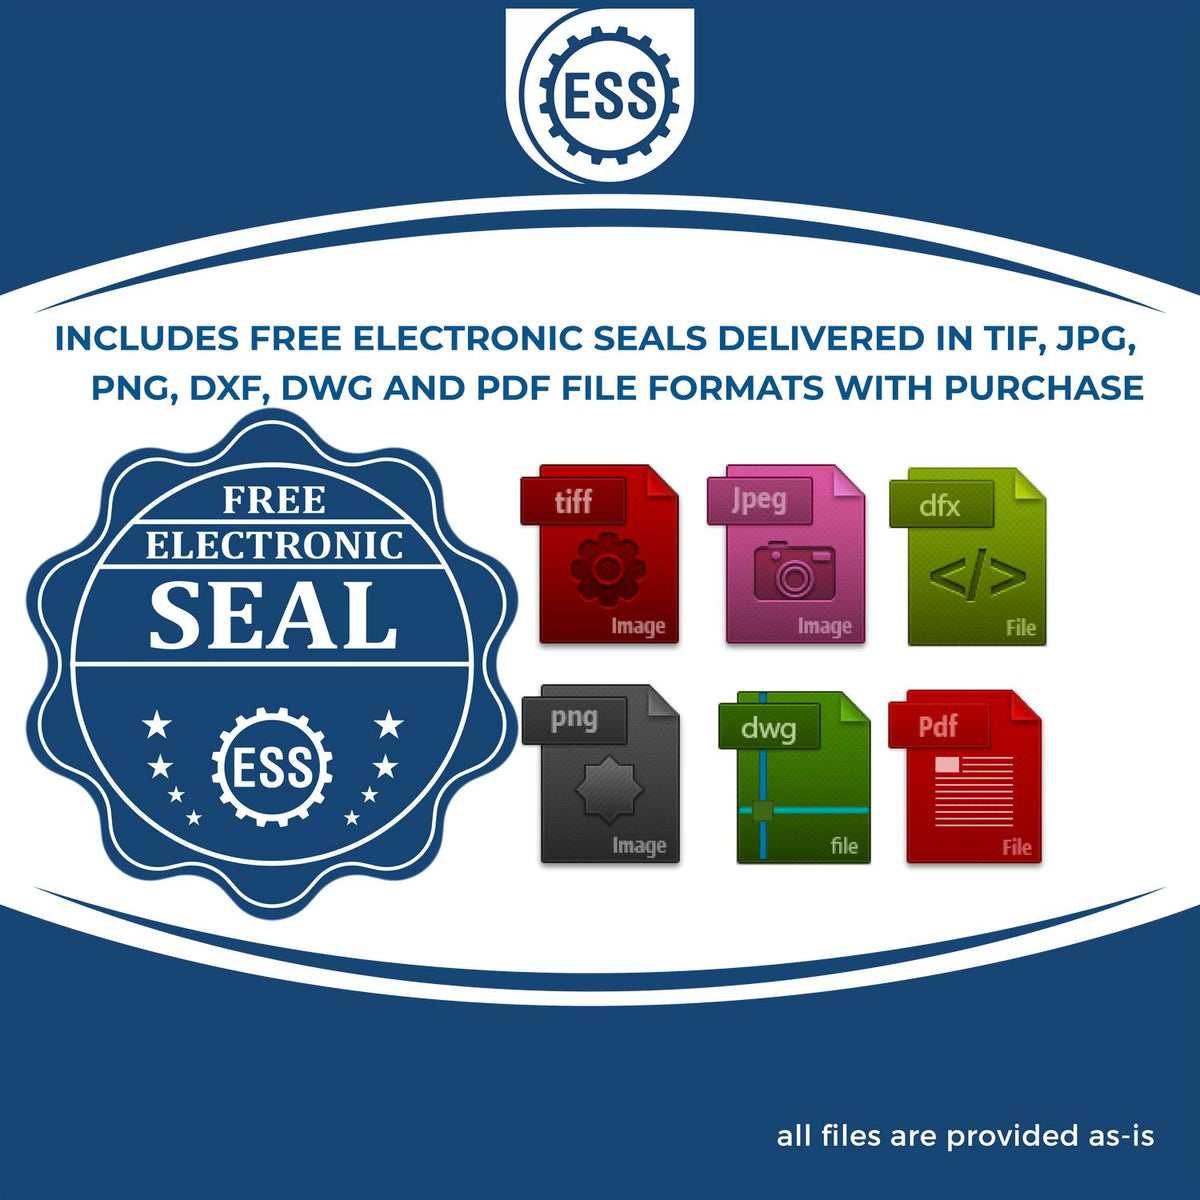 An infographic for the free electronic seal for the New Jersey Professional Engineer Seal Stamp illustrating the different file type icons such as DXF, DWG, TIF, JPG and PNG.